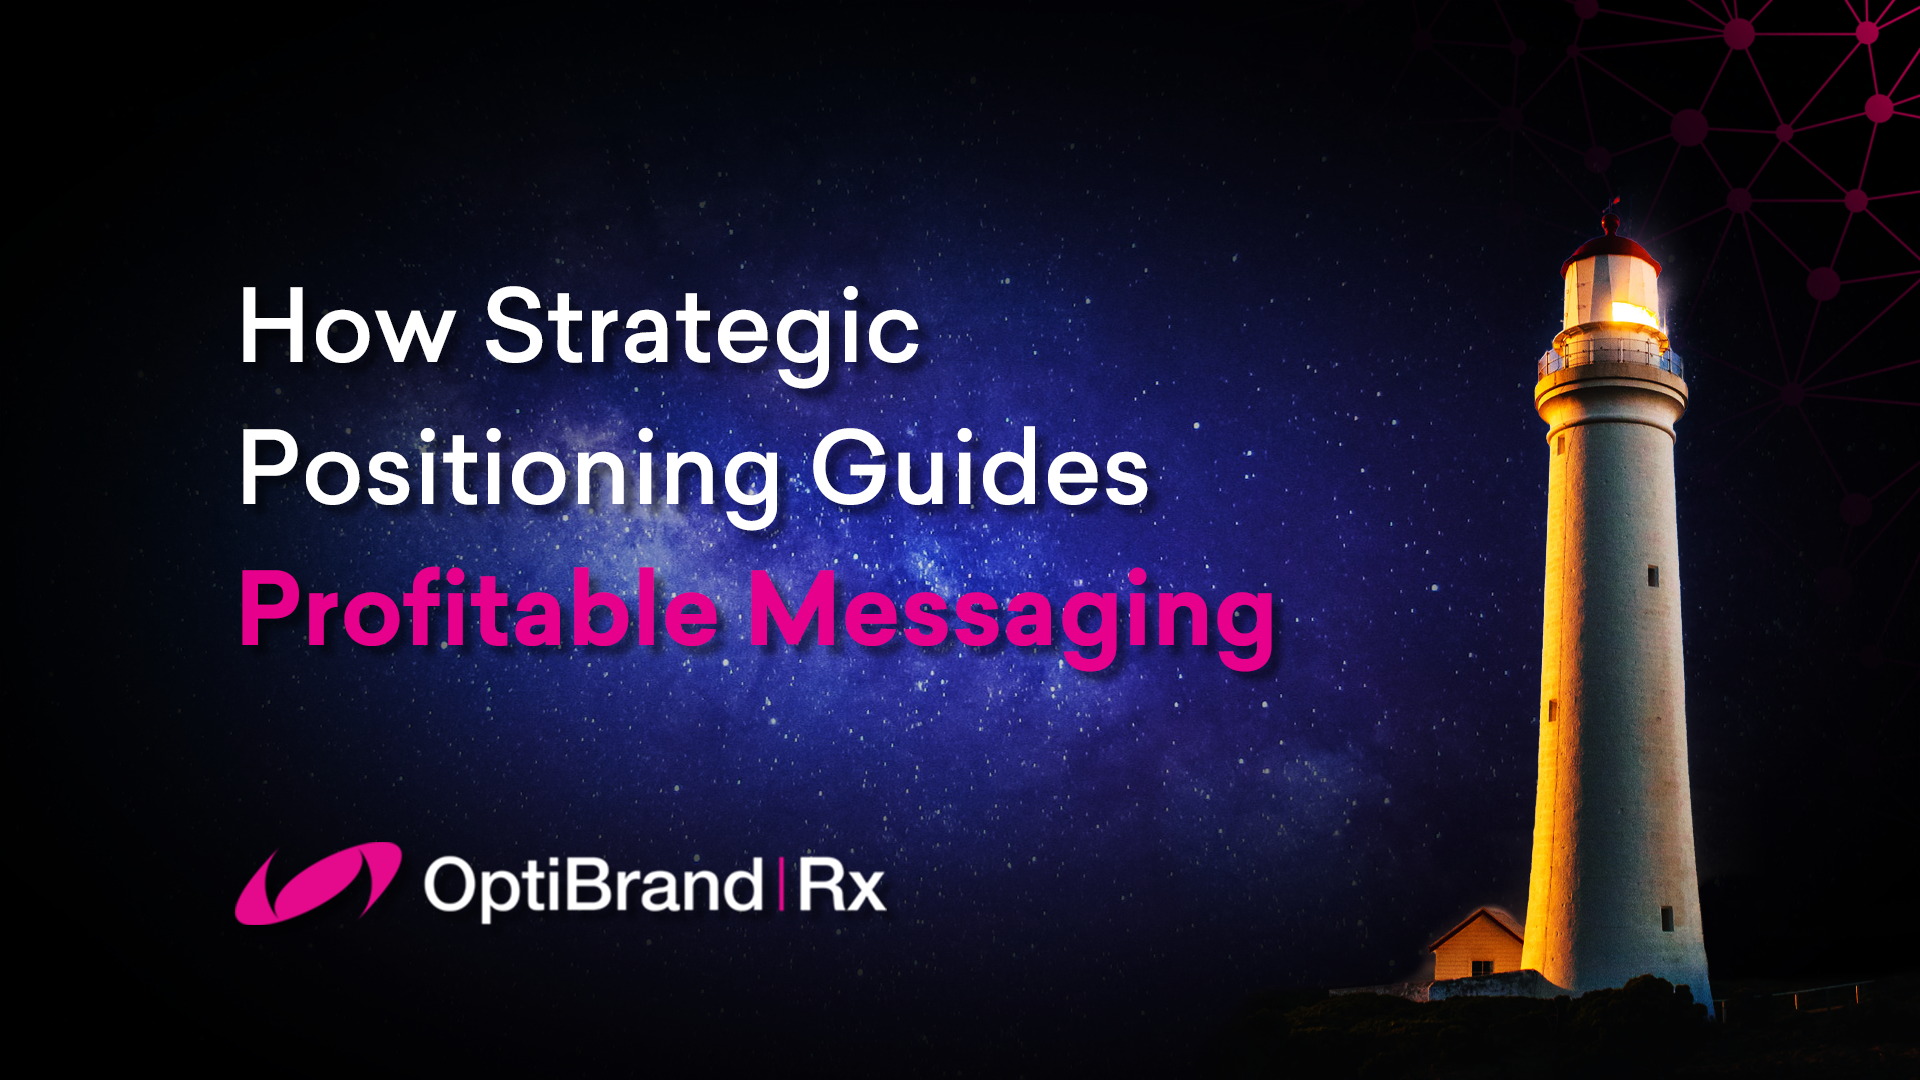 How Strategic Positioning Guides Profitable Messaging. OptiBrand Rx.